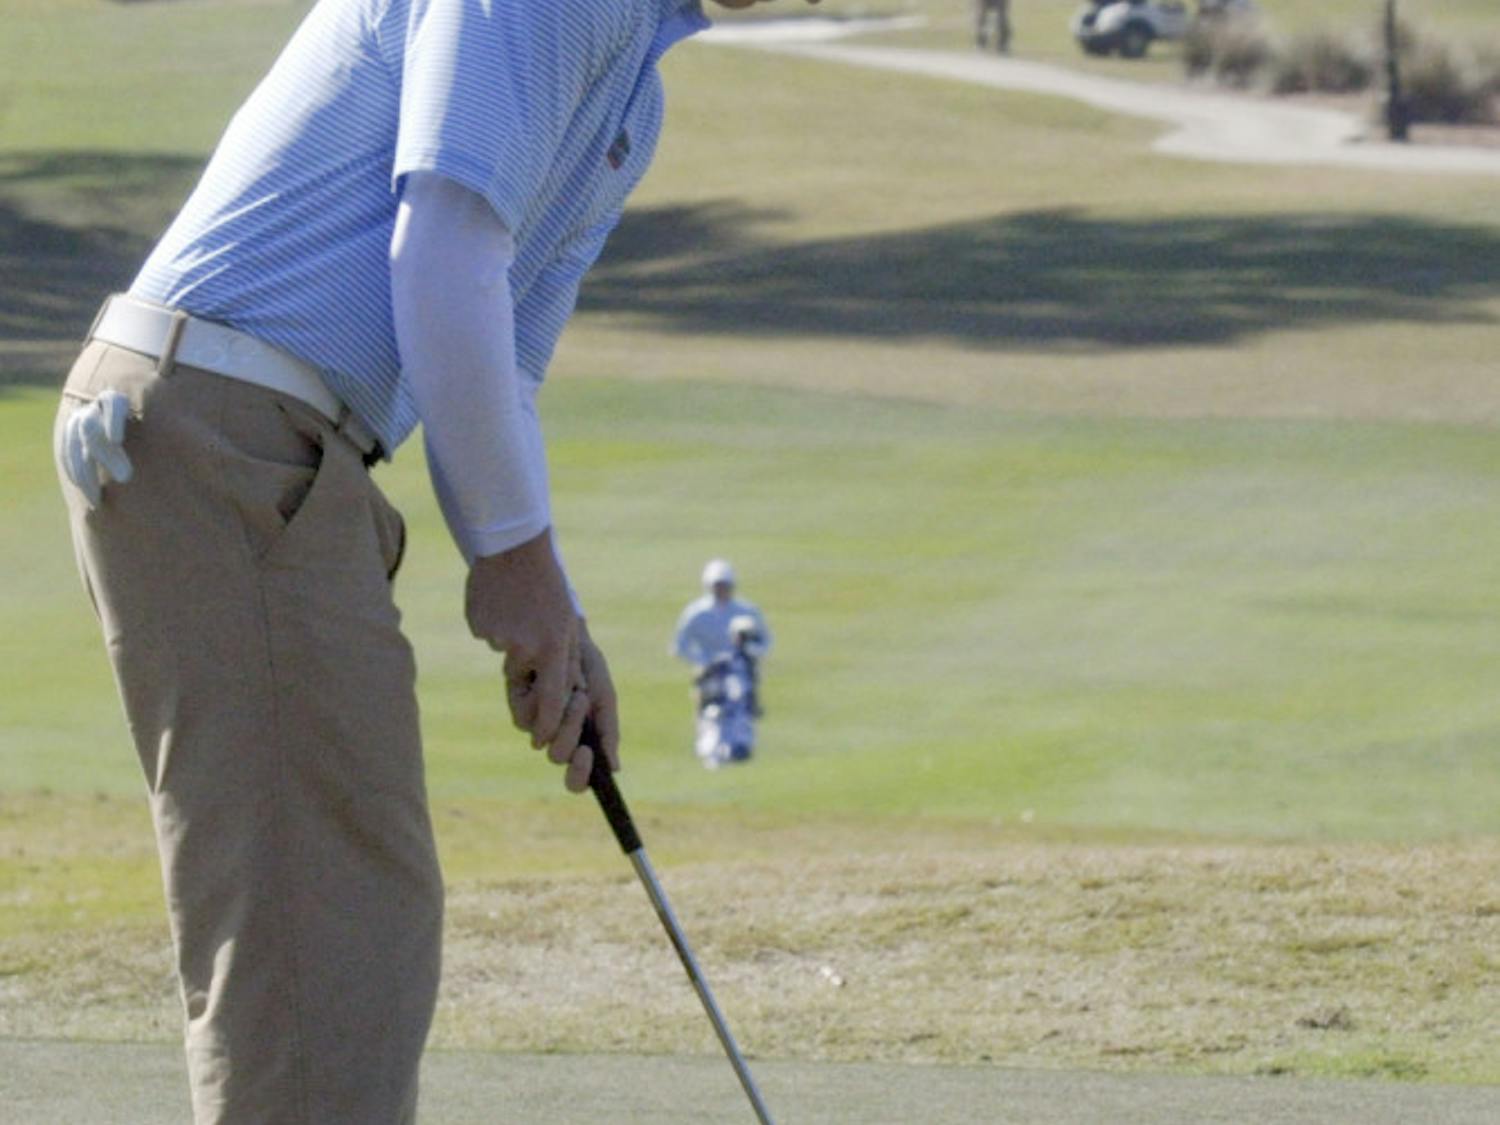 Eric Banks putts during the first day of the SunTrust Gator Invitational on Feb. 14.